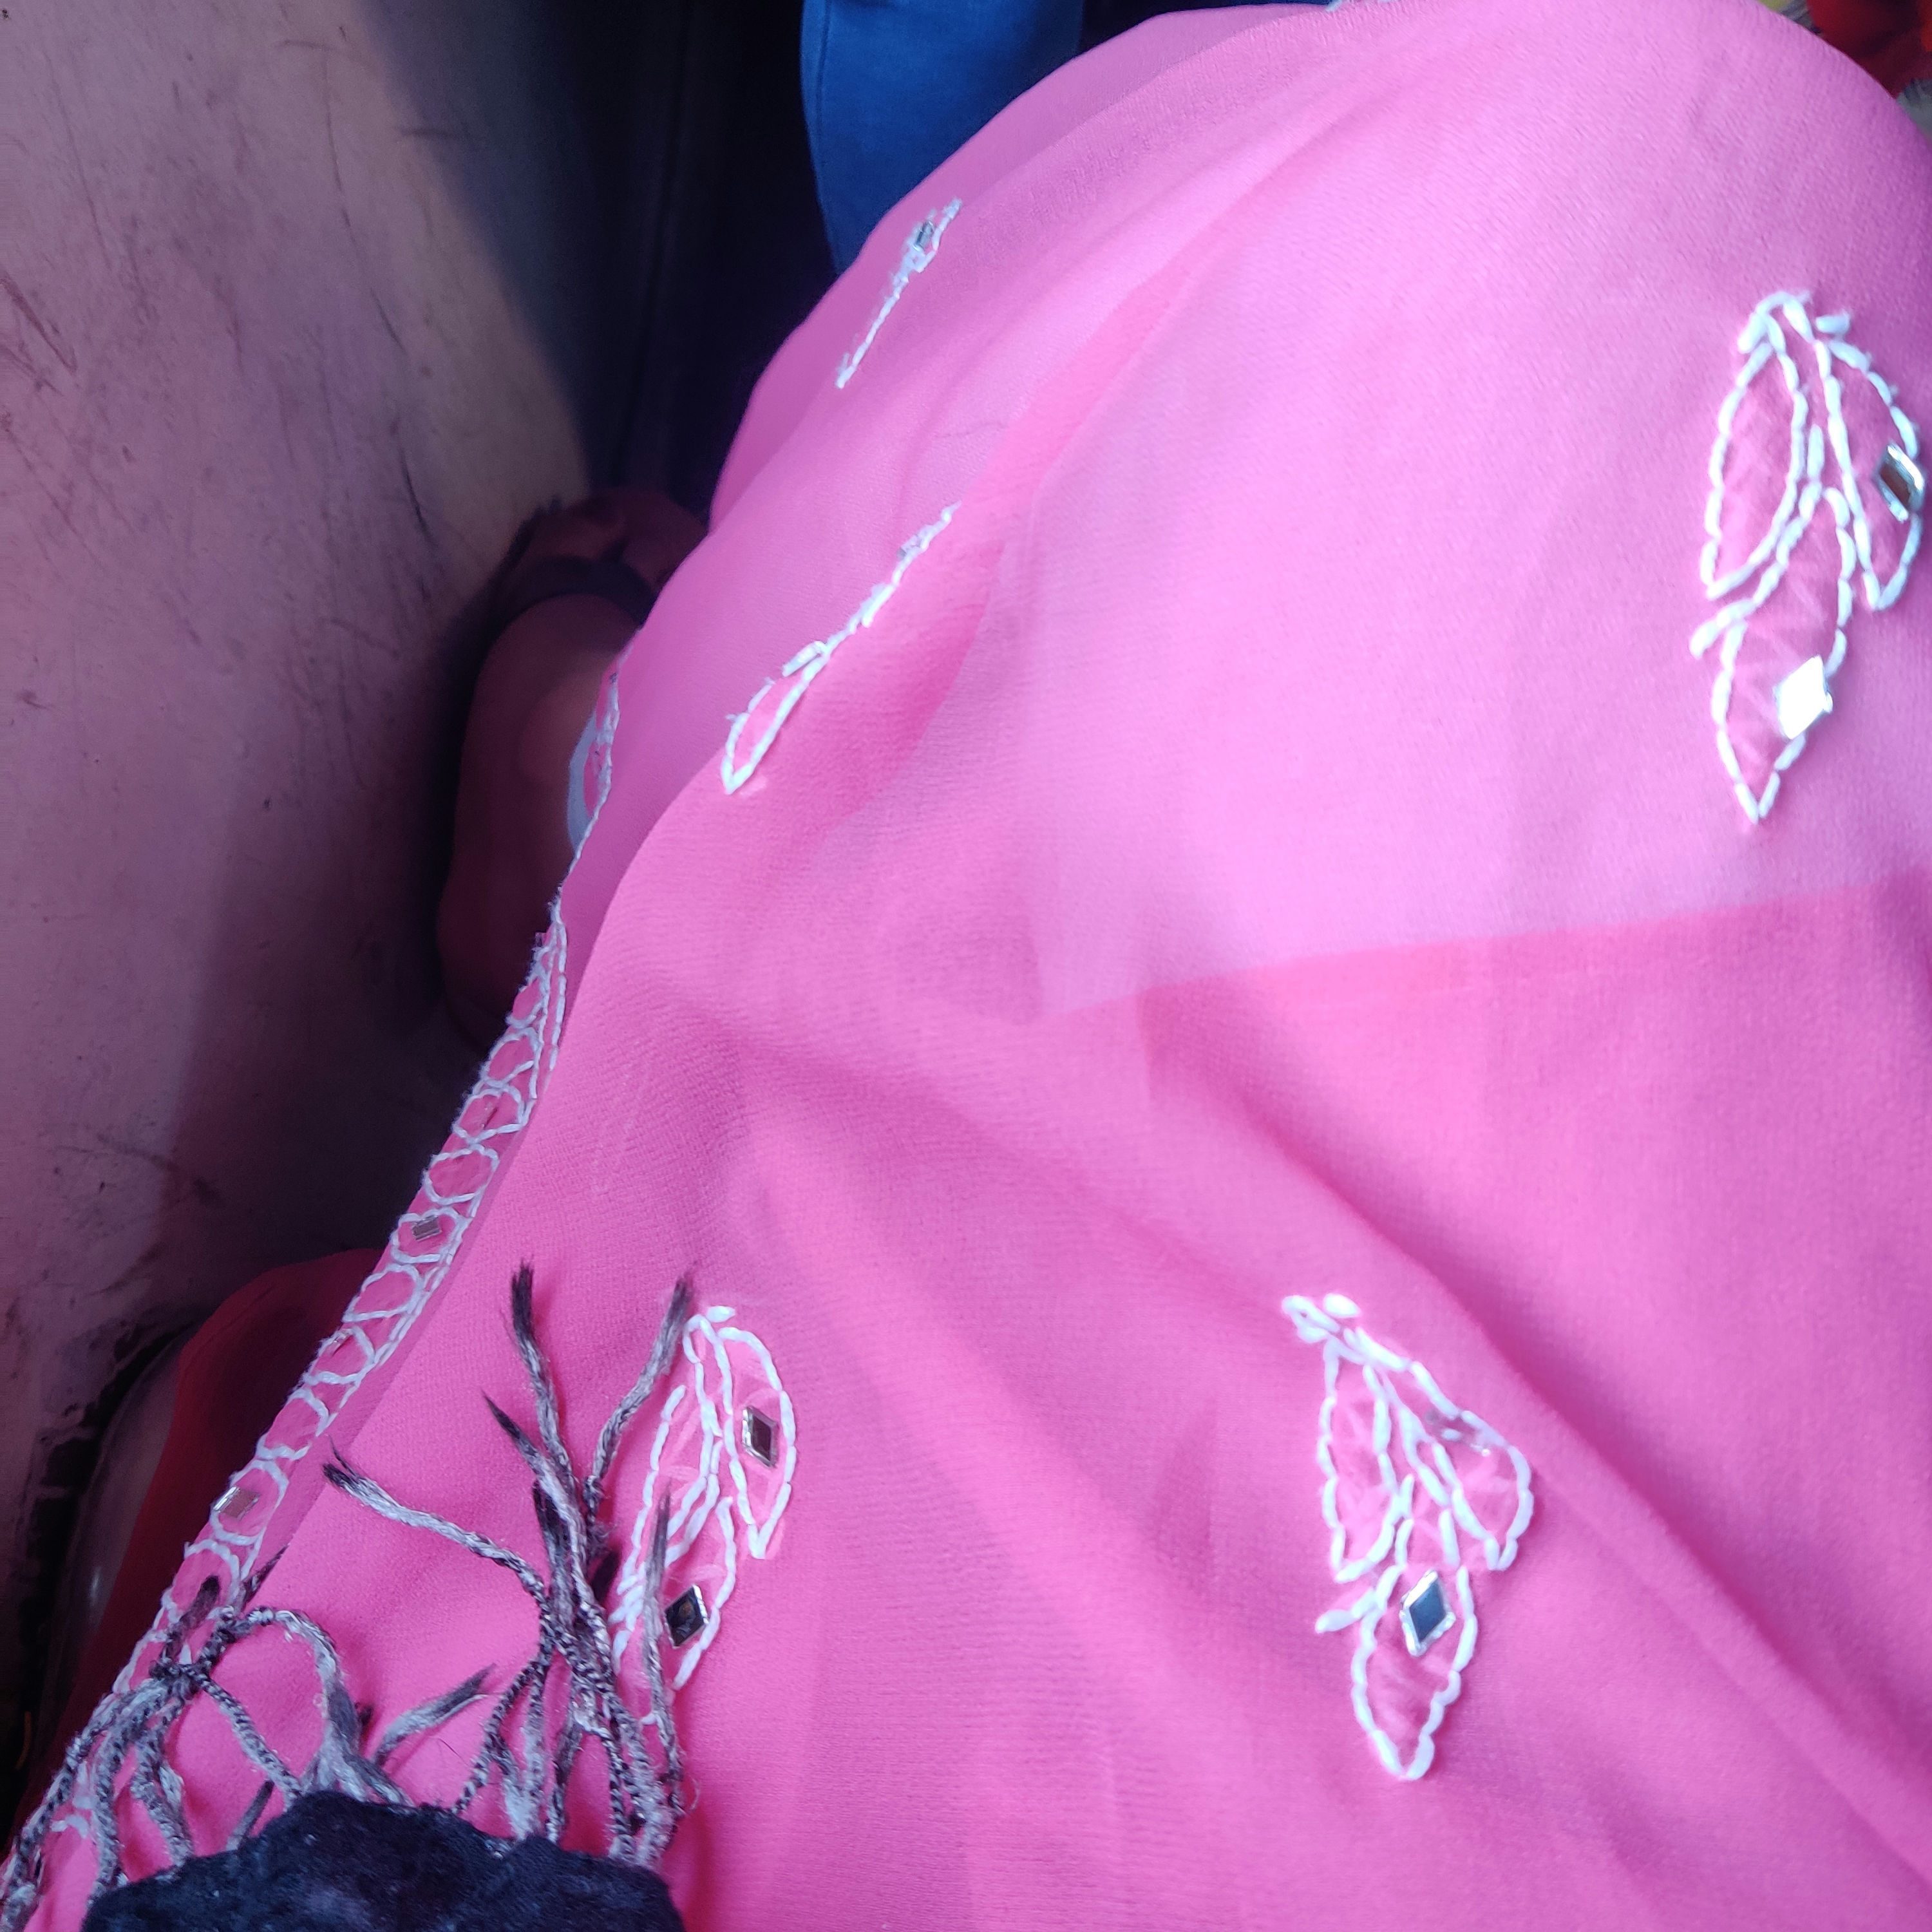 Today, this lady in train, told me that she liked my dress. These small things in ladies compartment just change the mood right. Mera toh din ban gaya. 🥰